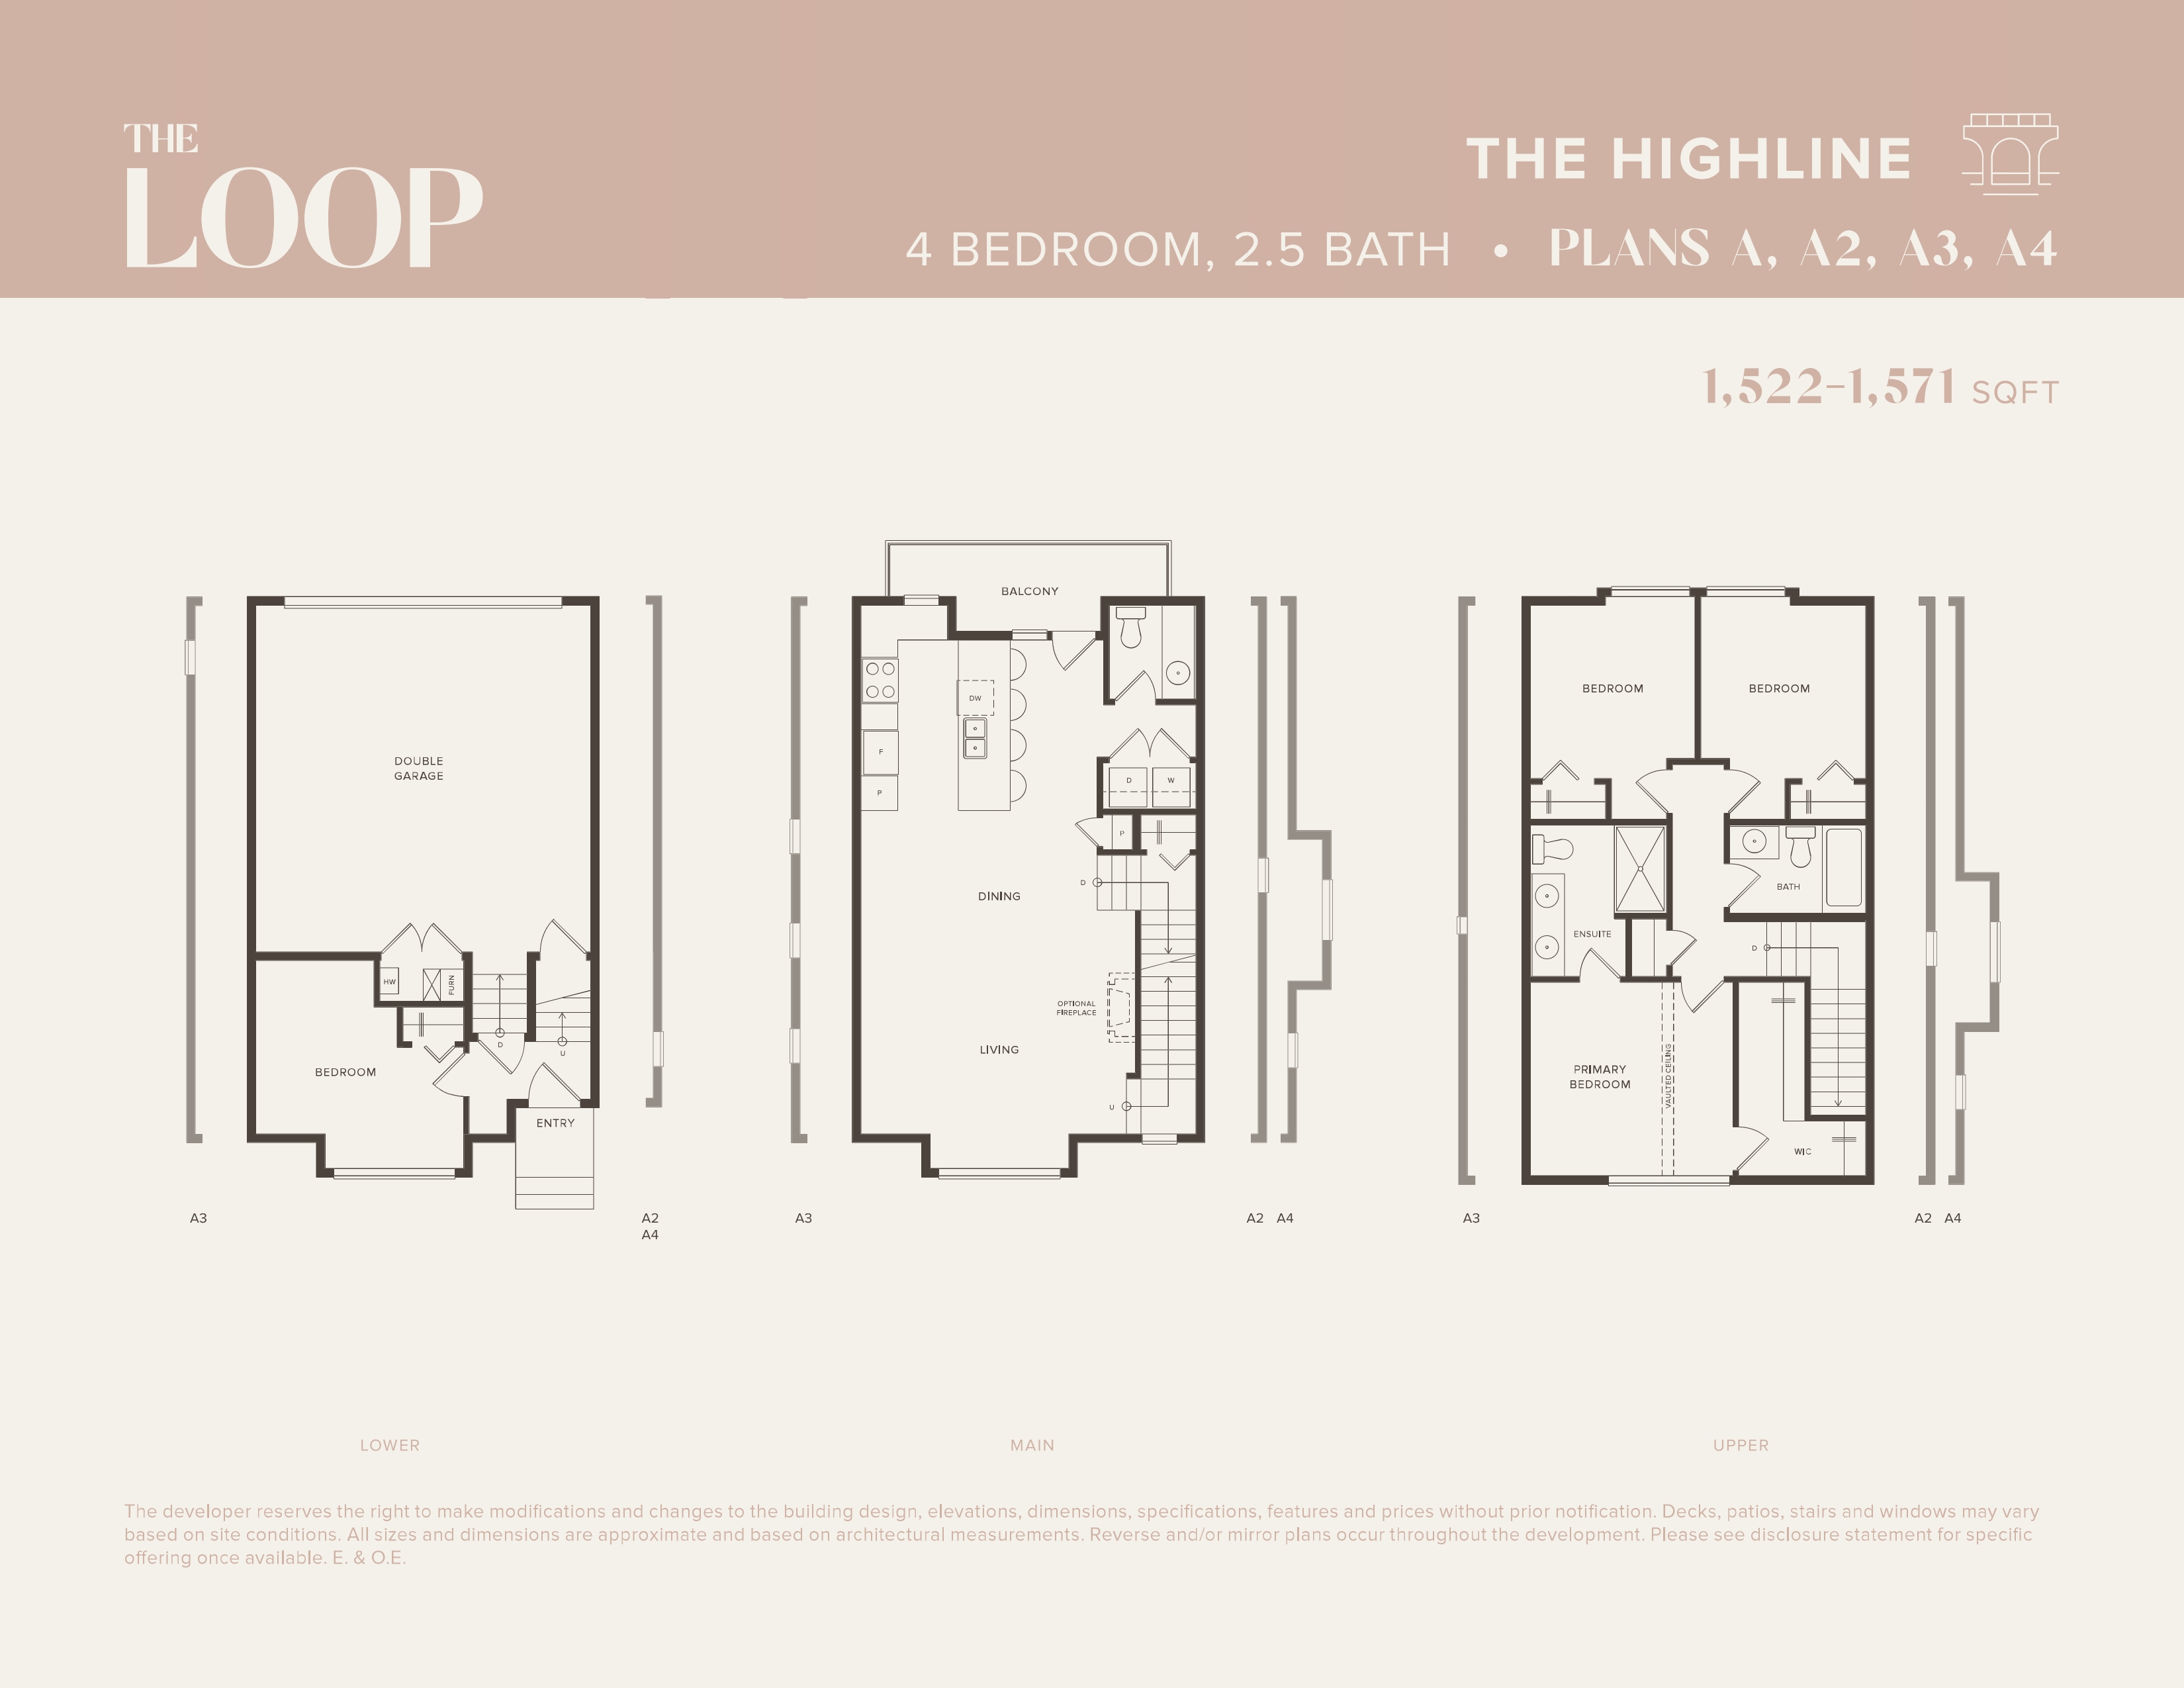  THE HIGHLINE  Floor Plan of The Loop Towns with undefined beds